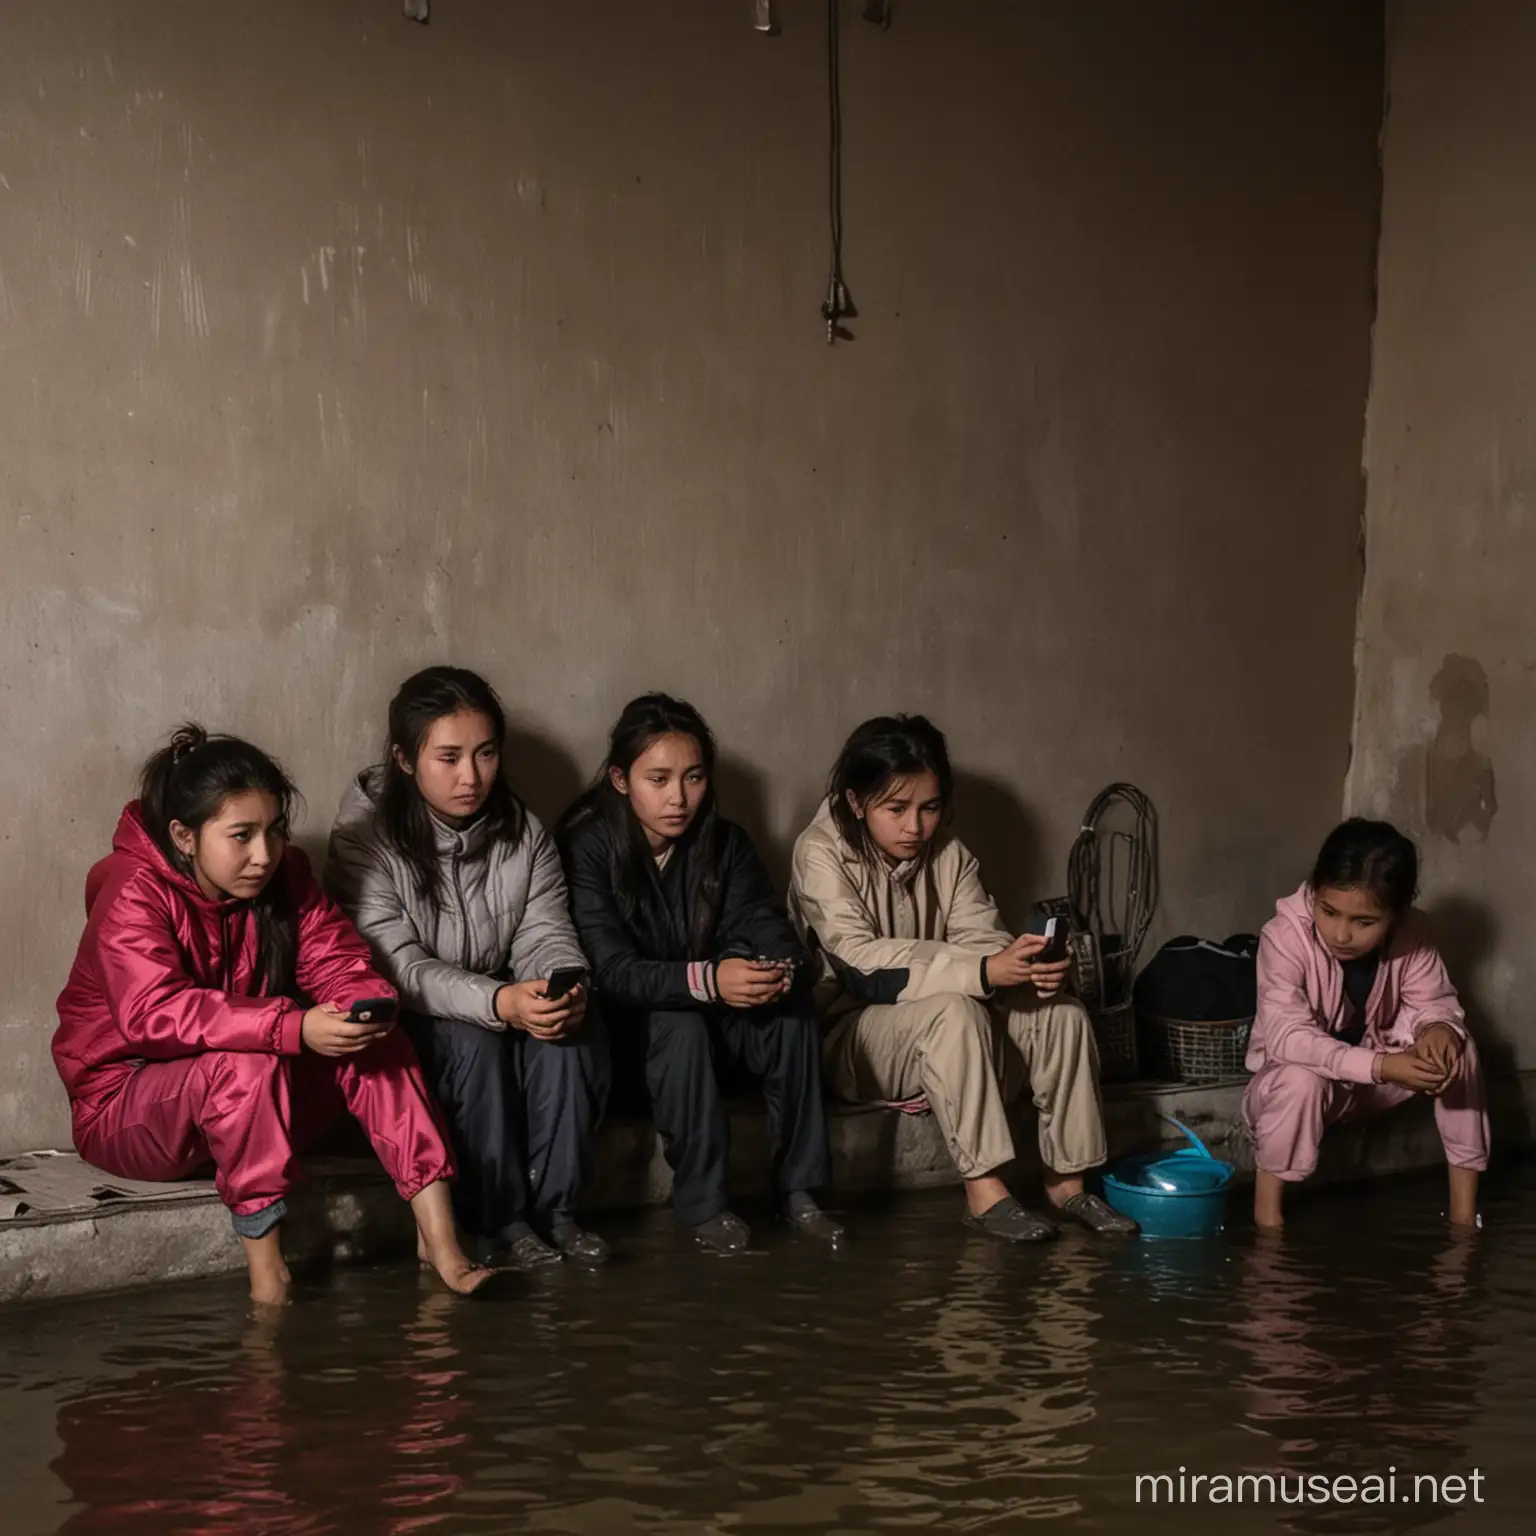 Kazakh Girls in Flooded Home Absorbed in Smartphone Glow